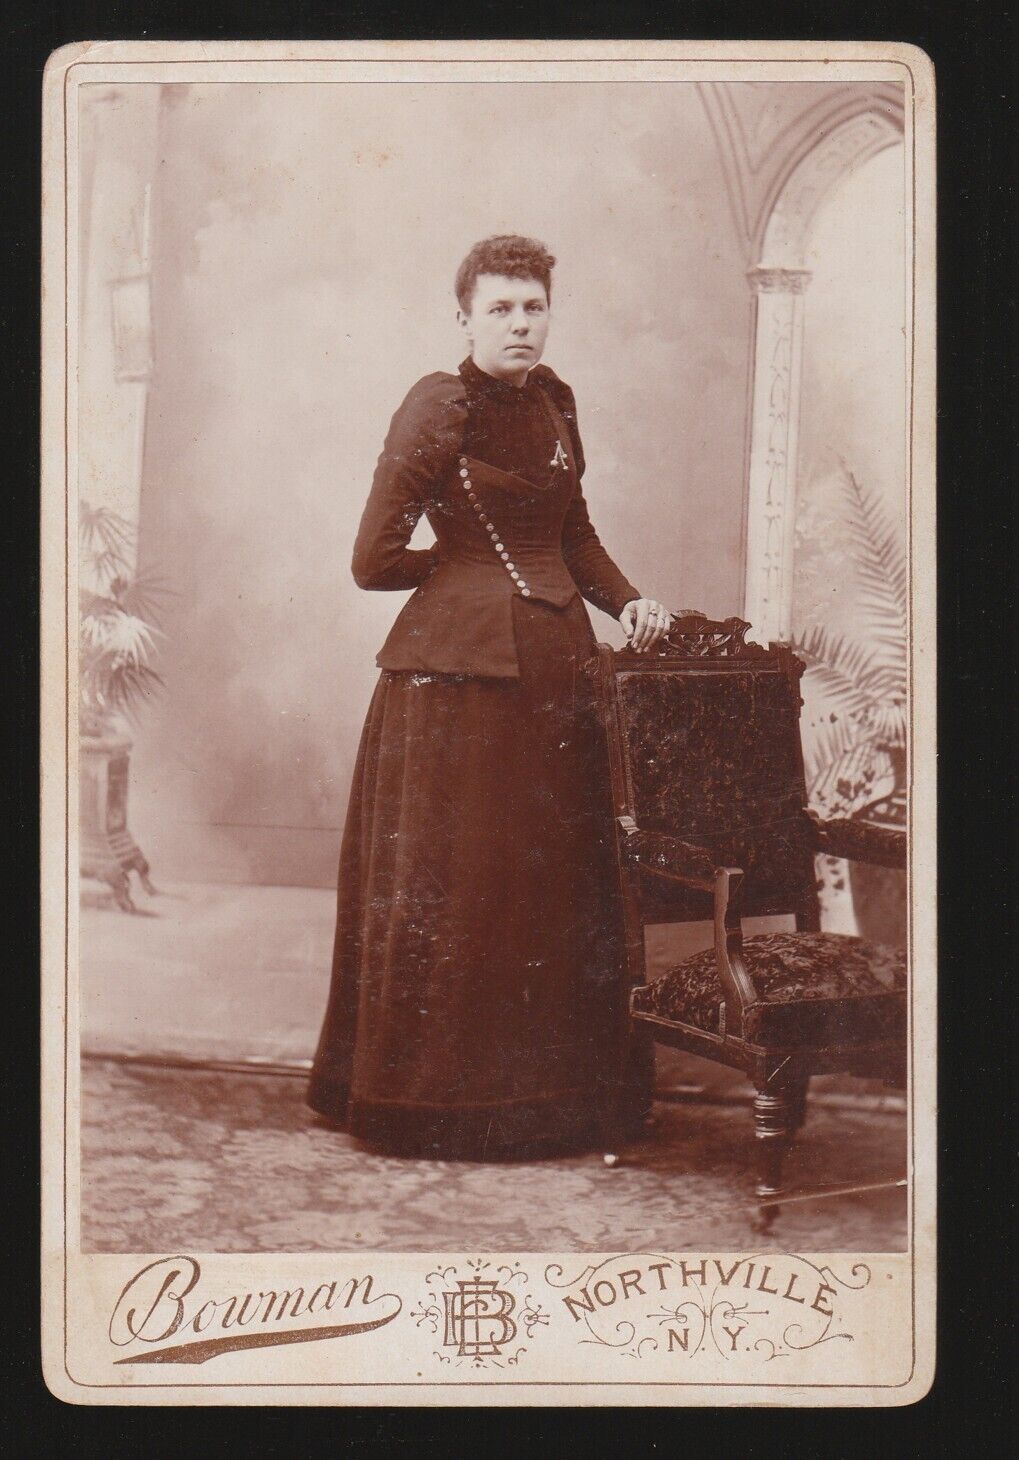 [79205] 1870-1890\'s CABINET CARD showing WOMAN by BOWMAN, NORTHVILLE, N. Y.